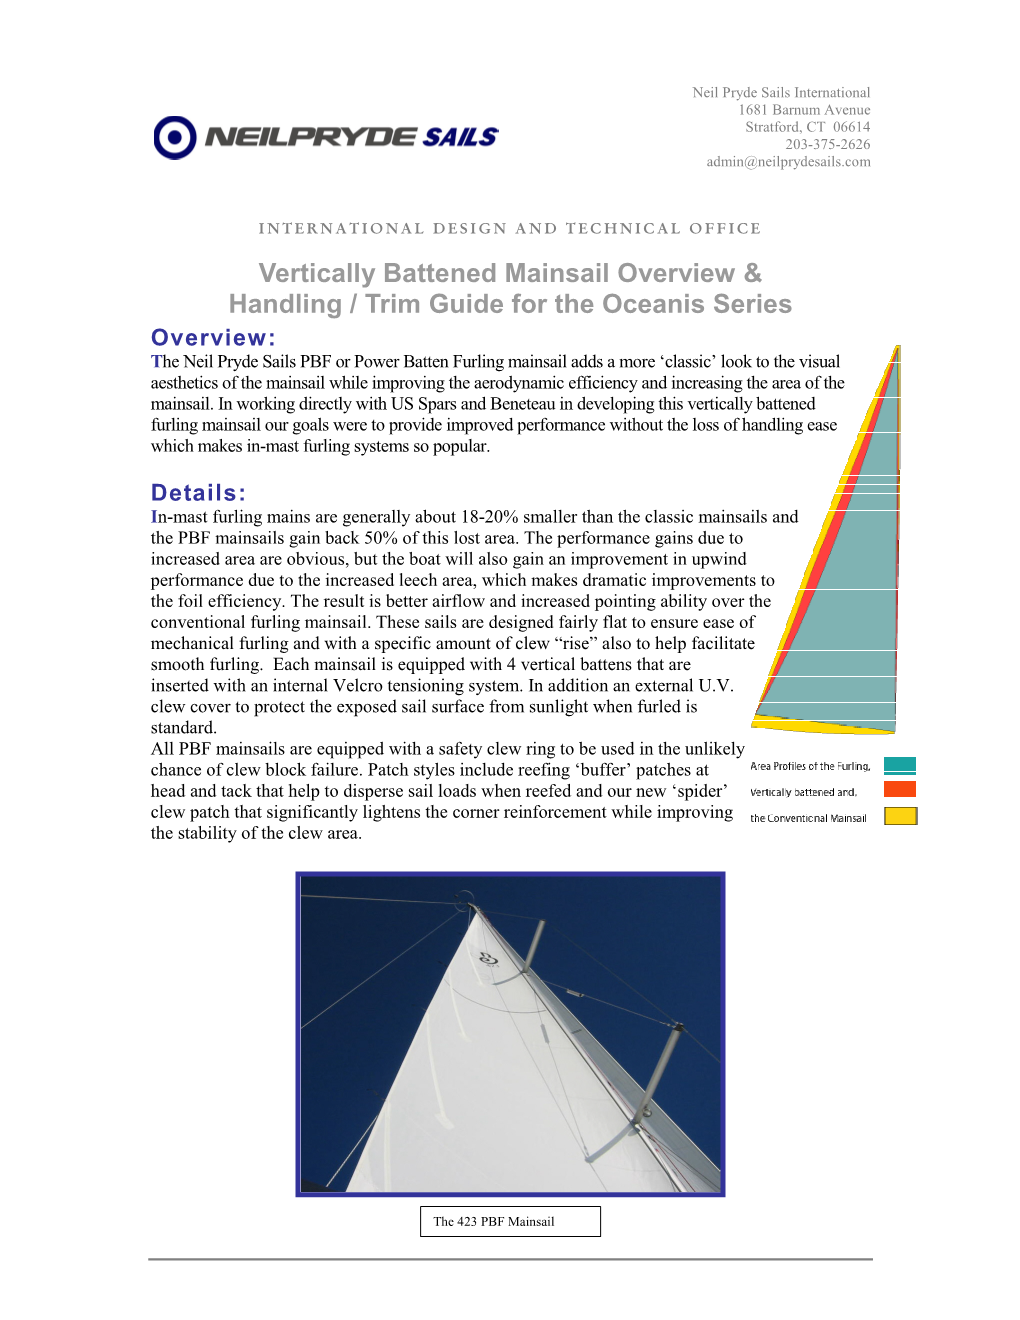 Vertically Battened Mainsail Overview & Handling / Trim Guide for the Oceanis Series